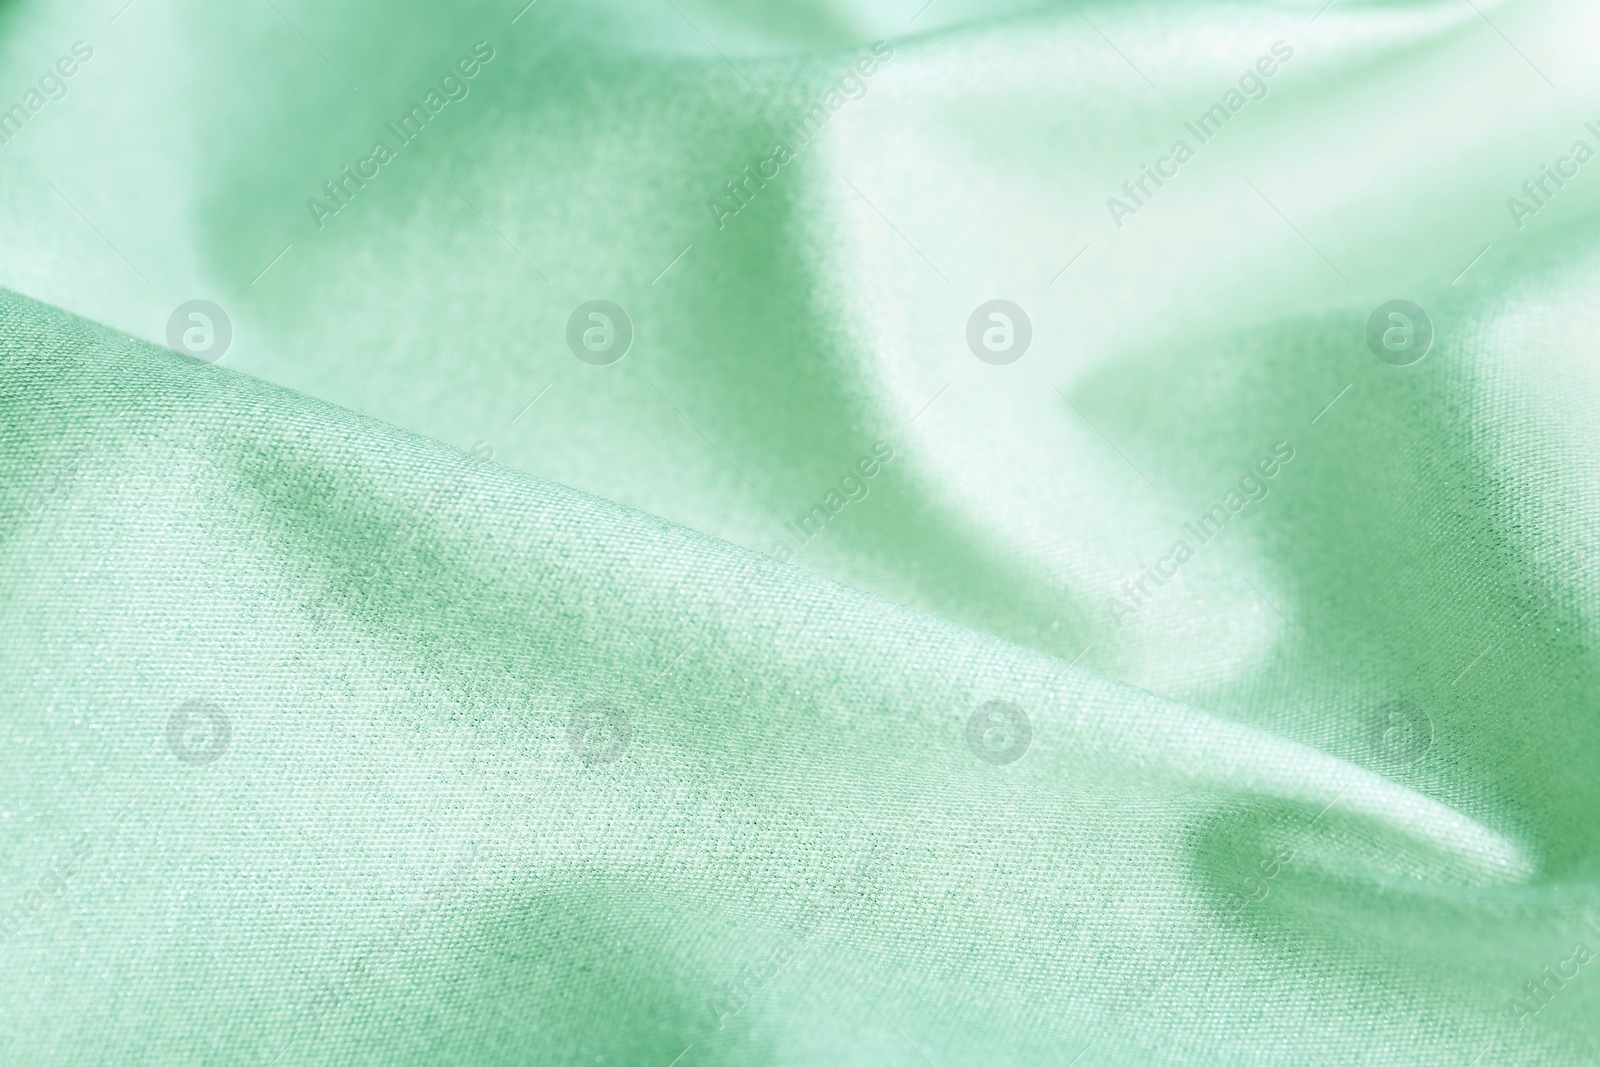 Image of Texture of beautiful silk as background. Image toned in mint color 